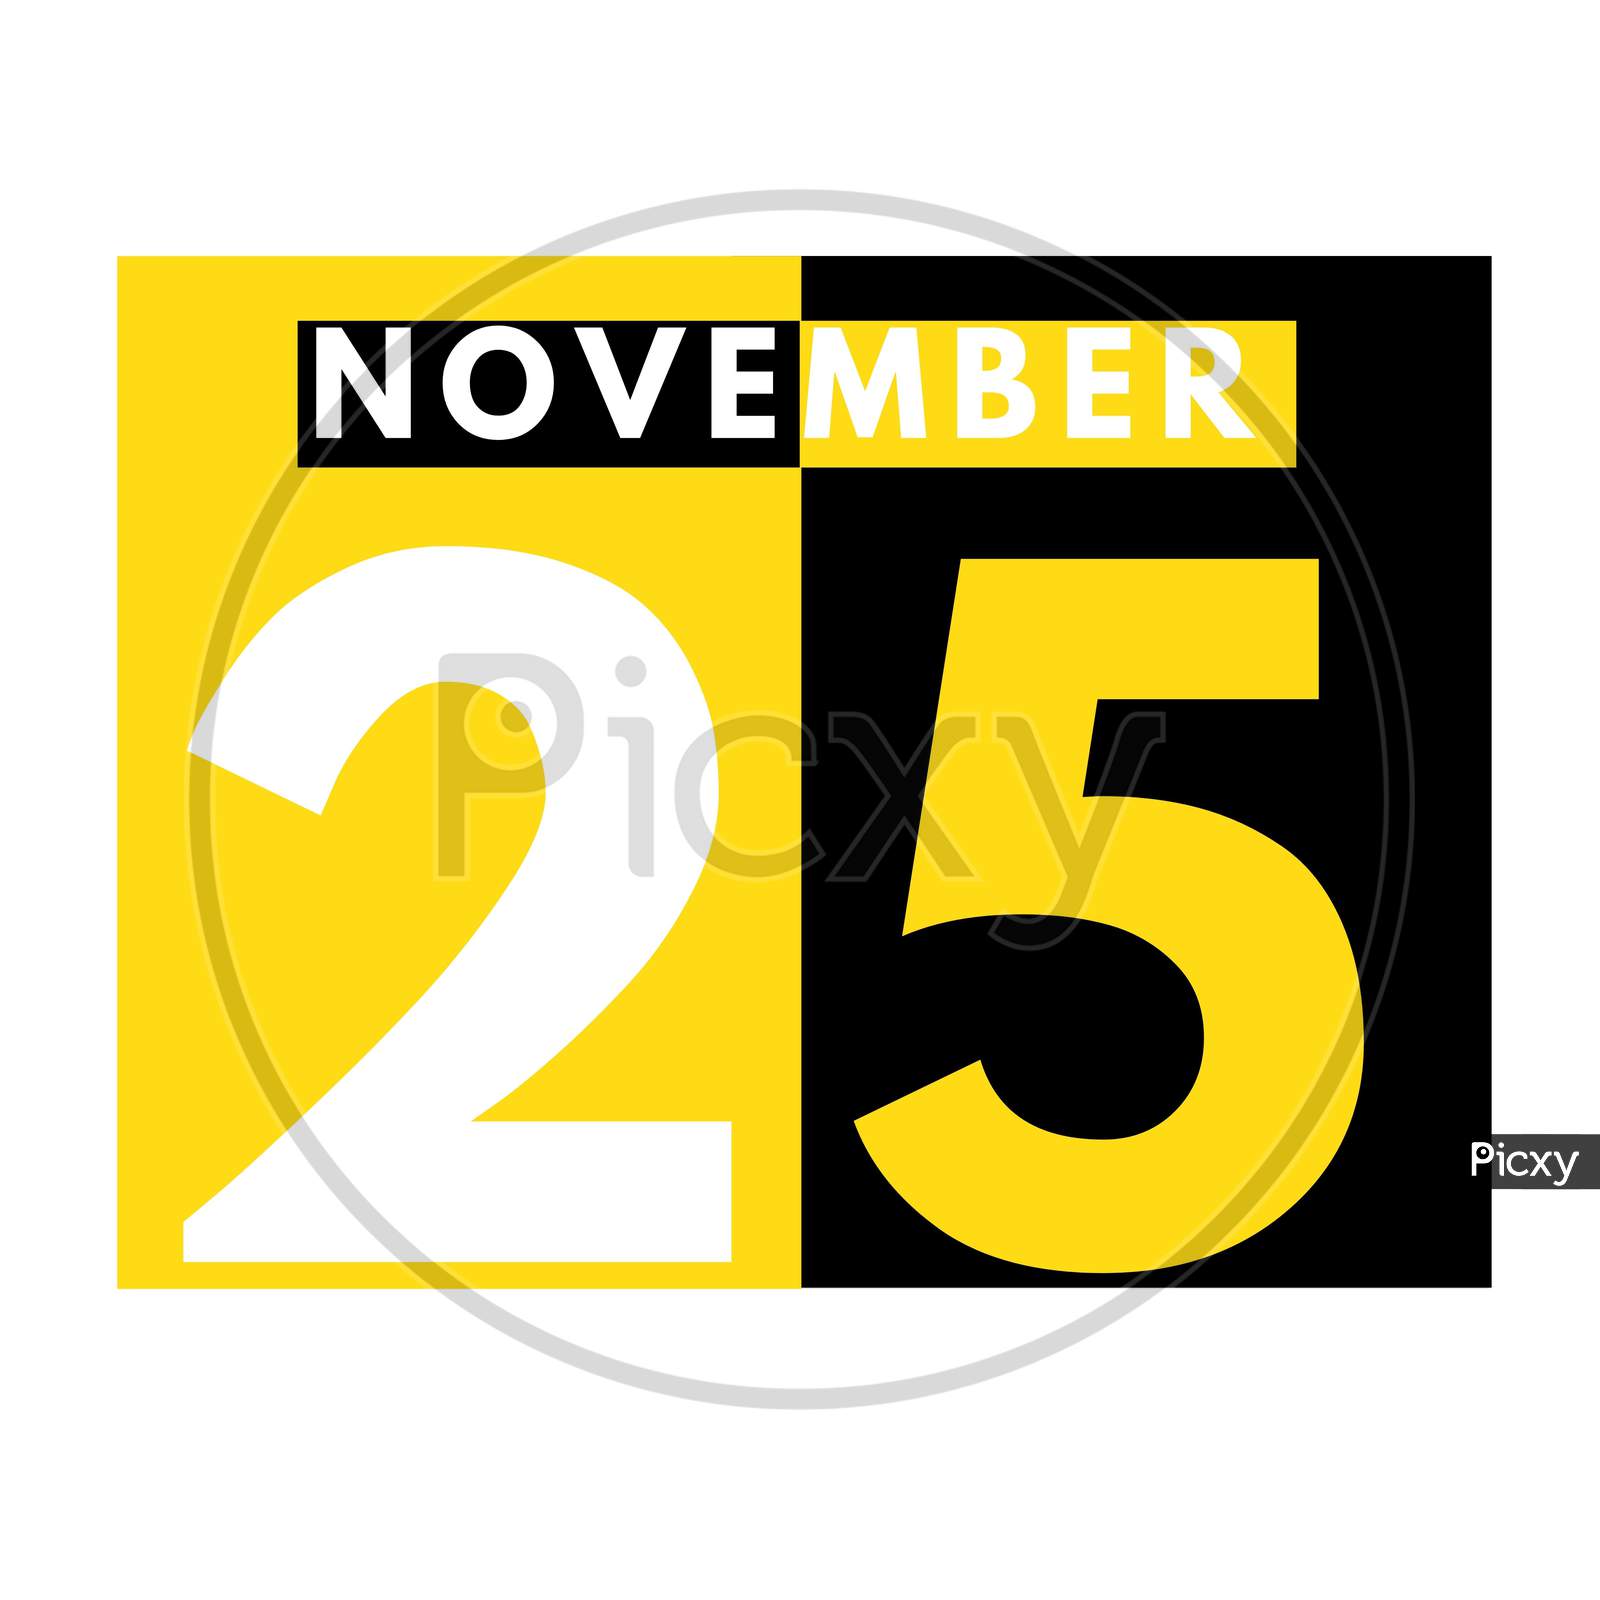 November 25 . Modern Daily Calendar Icon .Date ,Day, Month .Calendar For The Month Of November